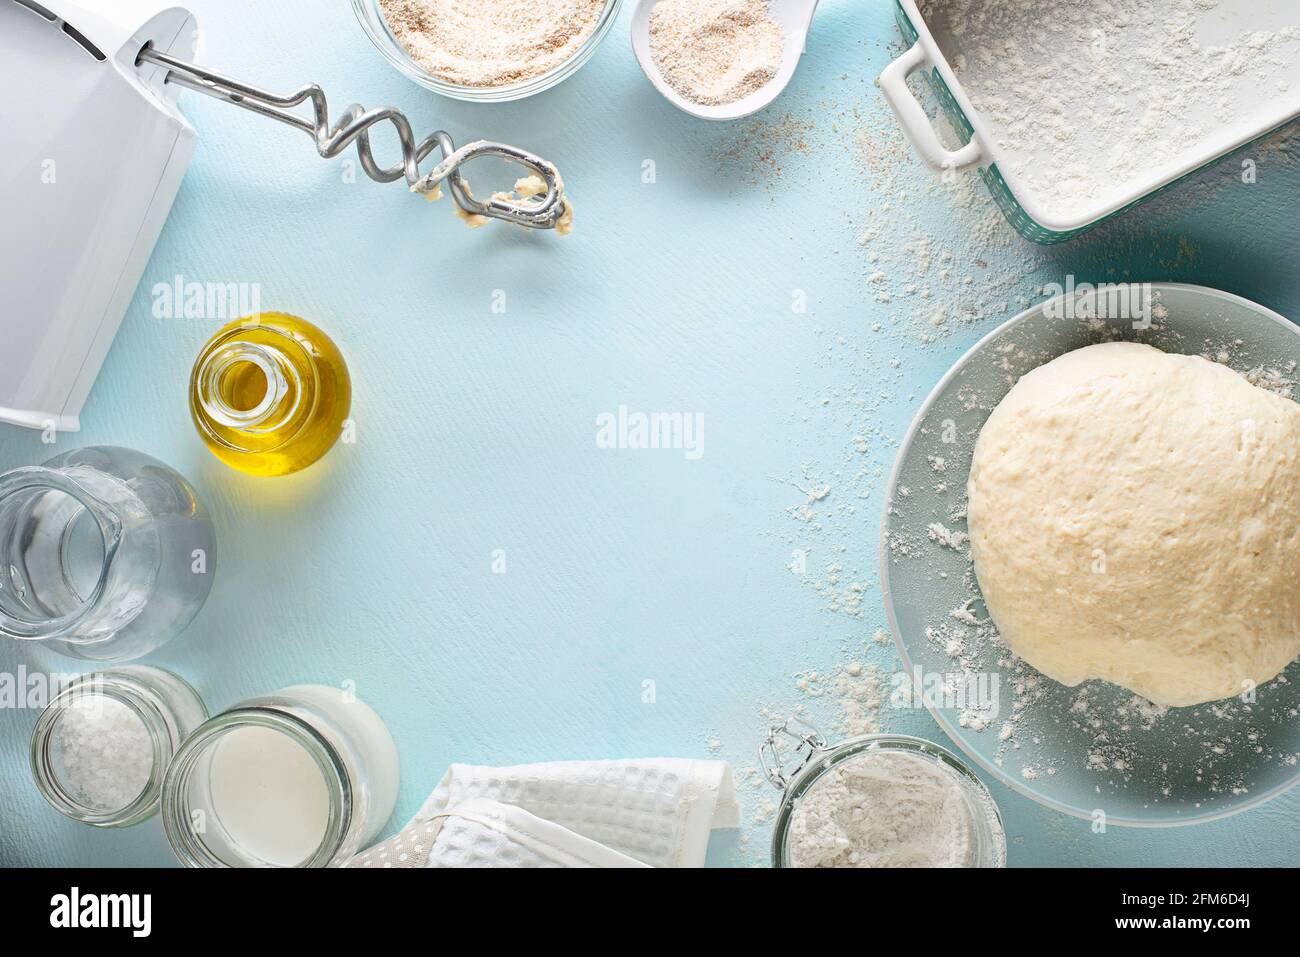 Ingredients for making and baking homemade bread on blue table background. Mixing and kneading the dough Stock Photo